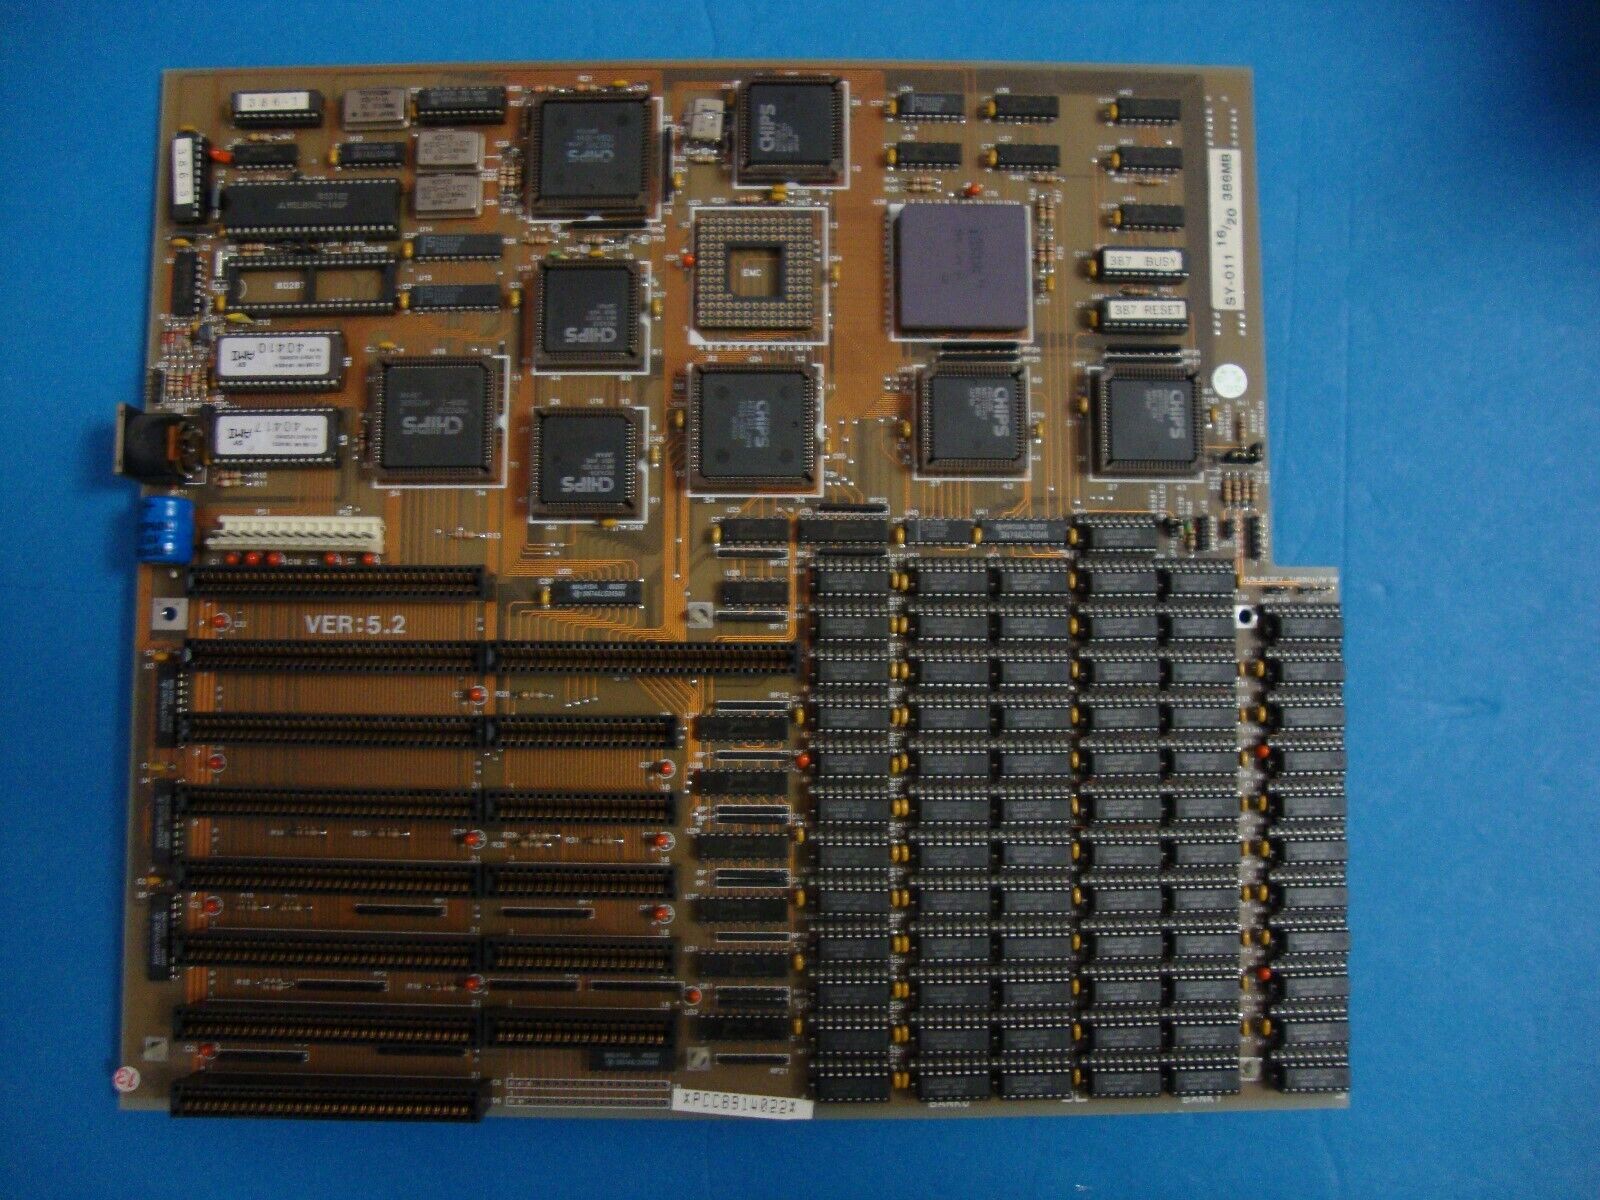 PCC-8914022 ISA 386 Motherboard, 2MB RAM, Intel A80386DX-16 CPU Tested